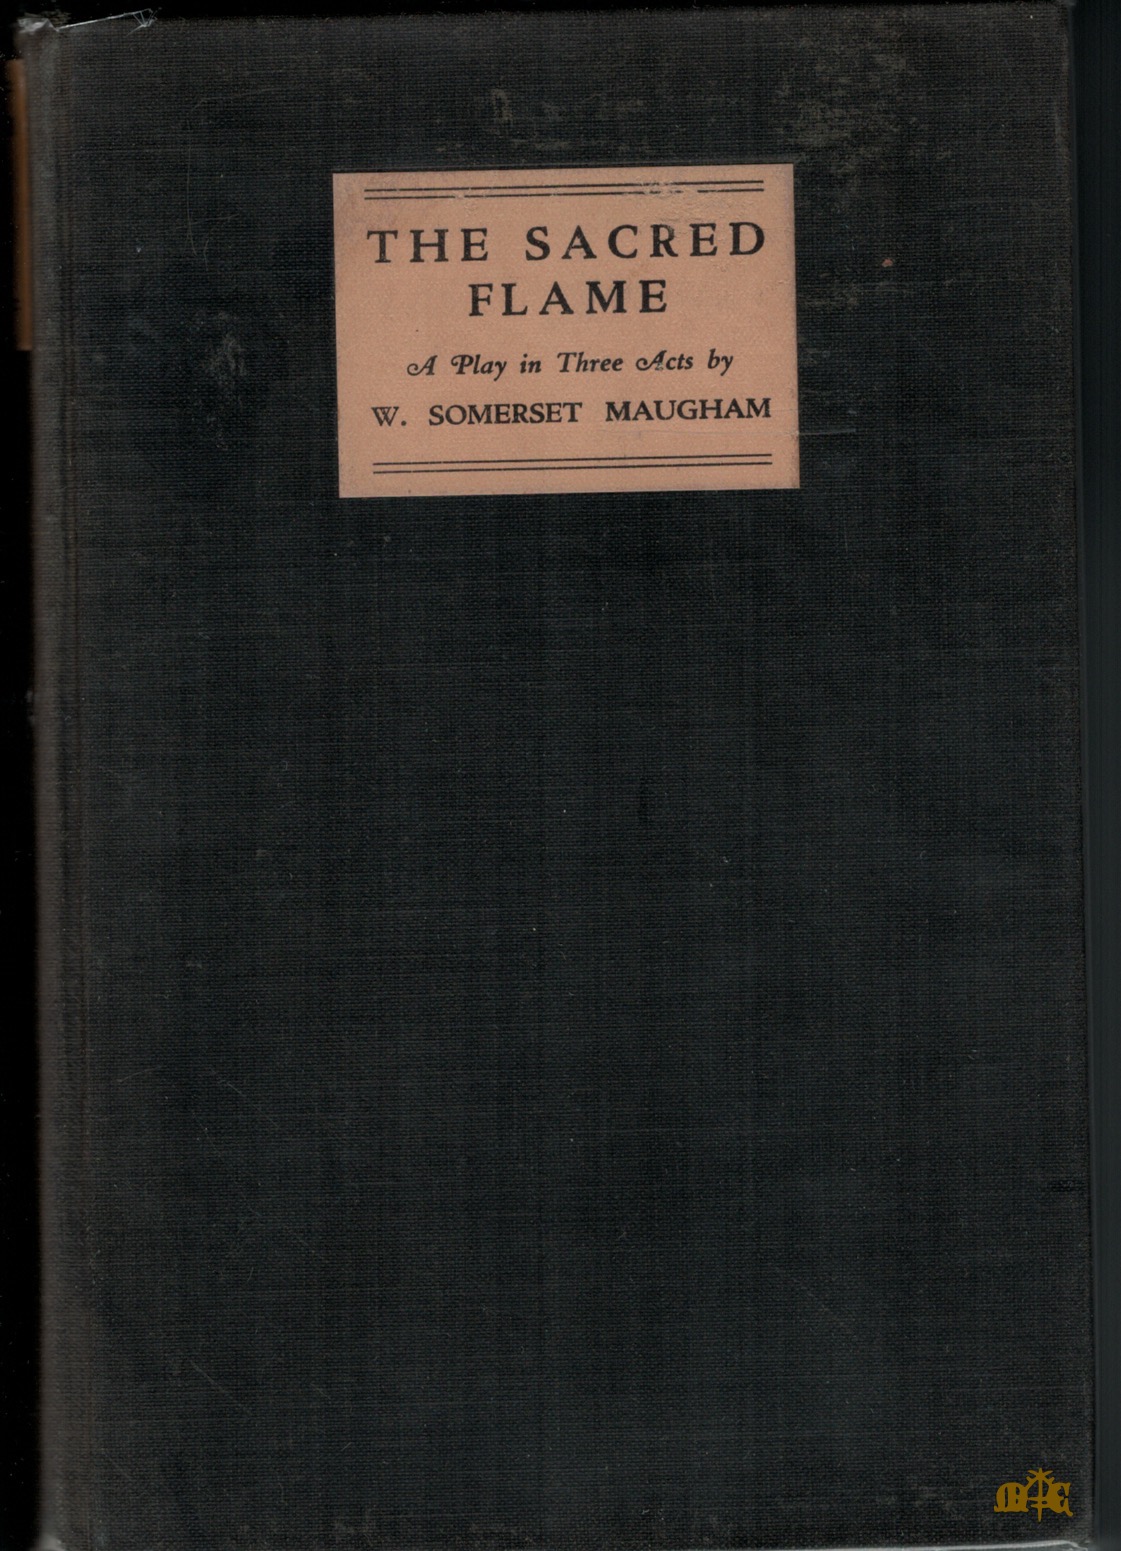 cover of The Sacred Flame 1928